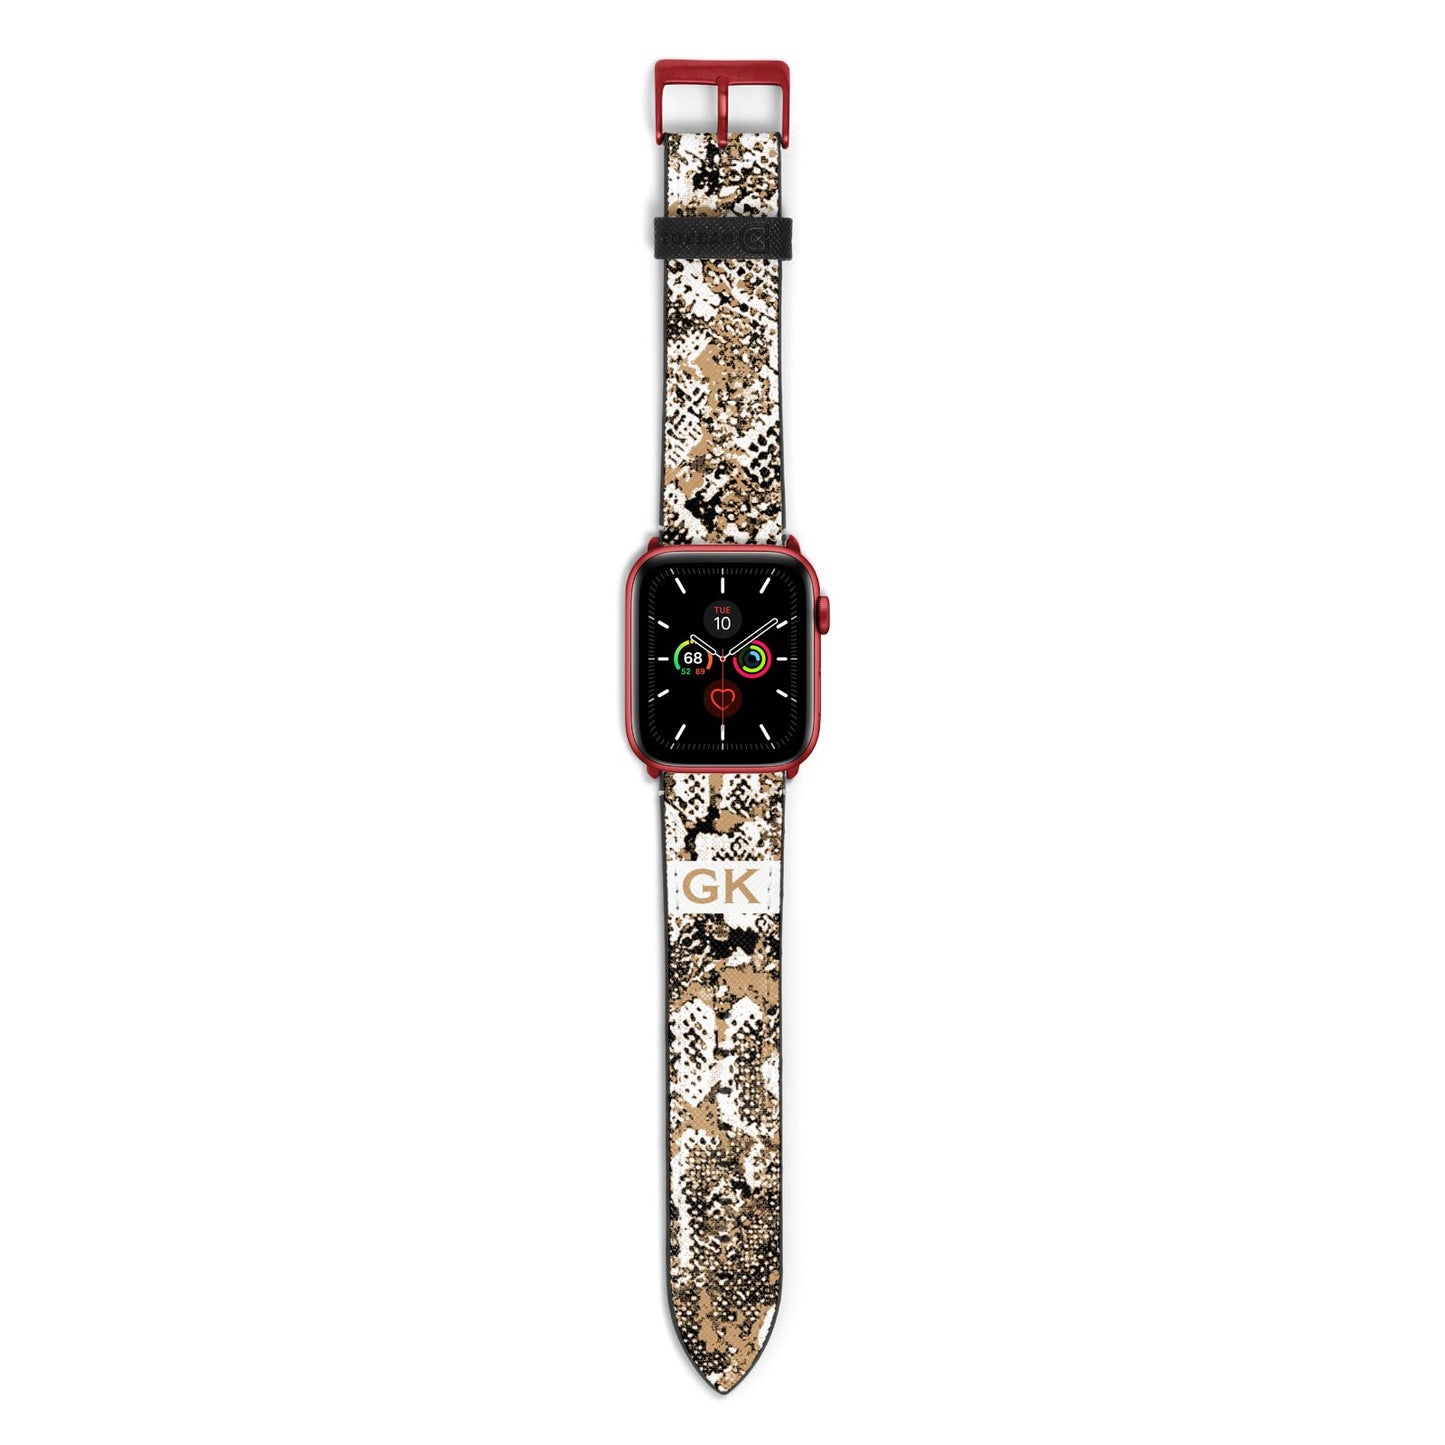 Custom Tan Snakeskin Apple Watch Strap with Red Hardware